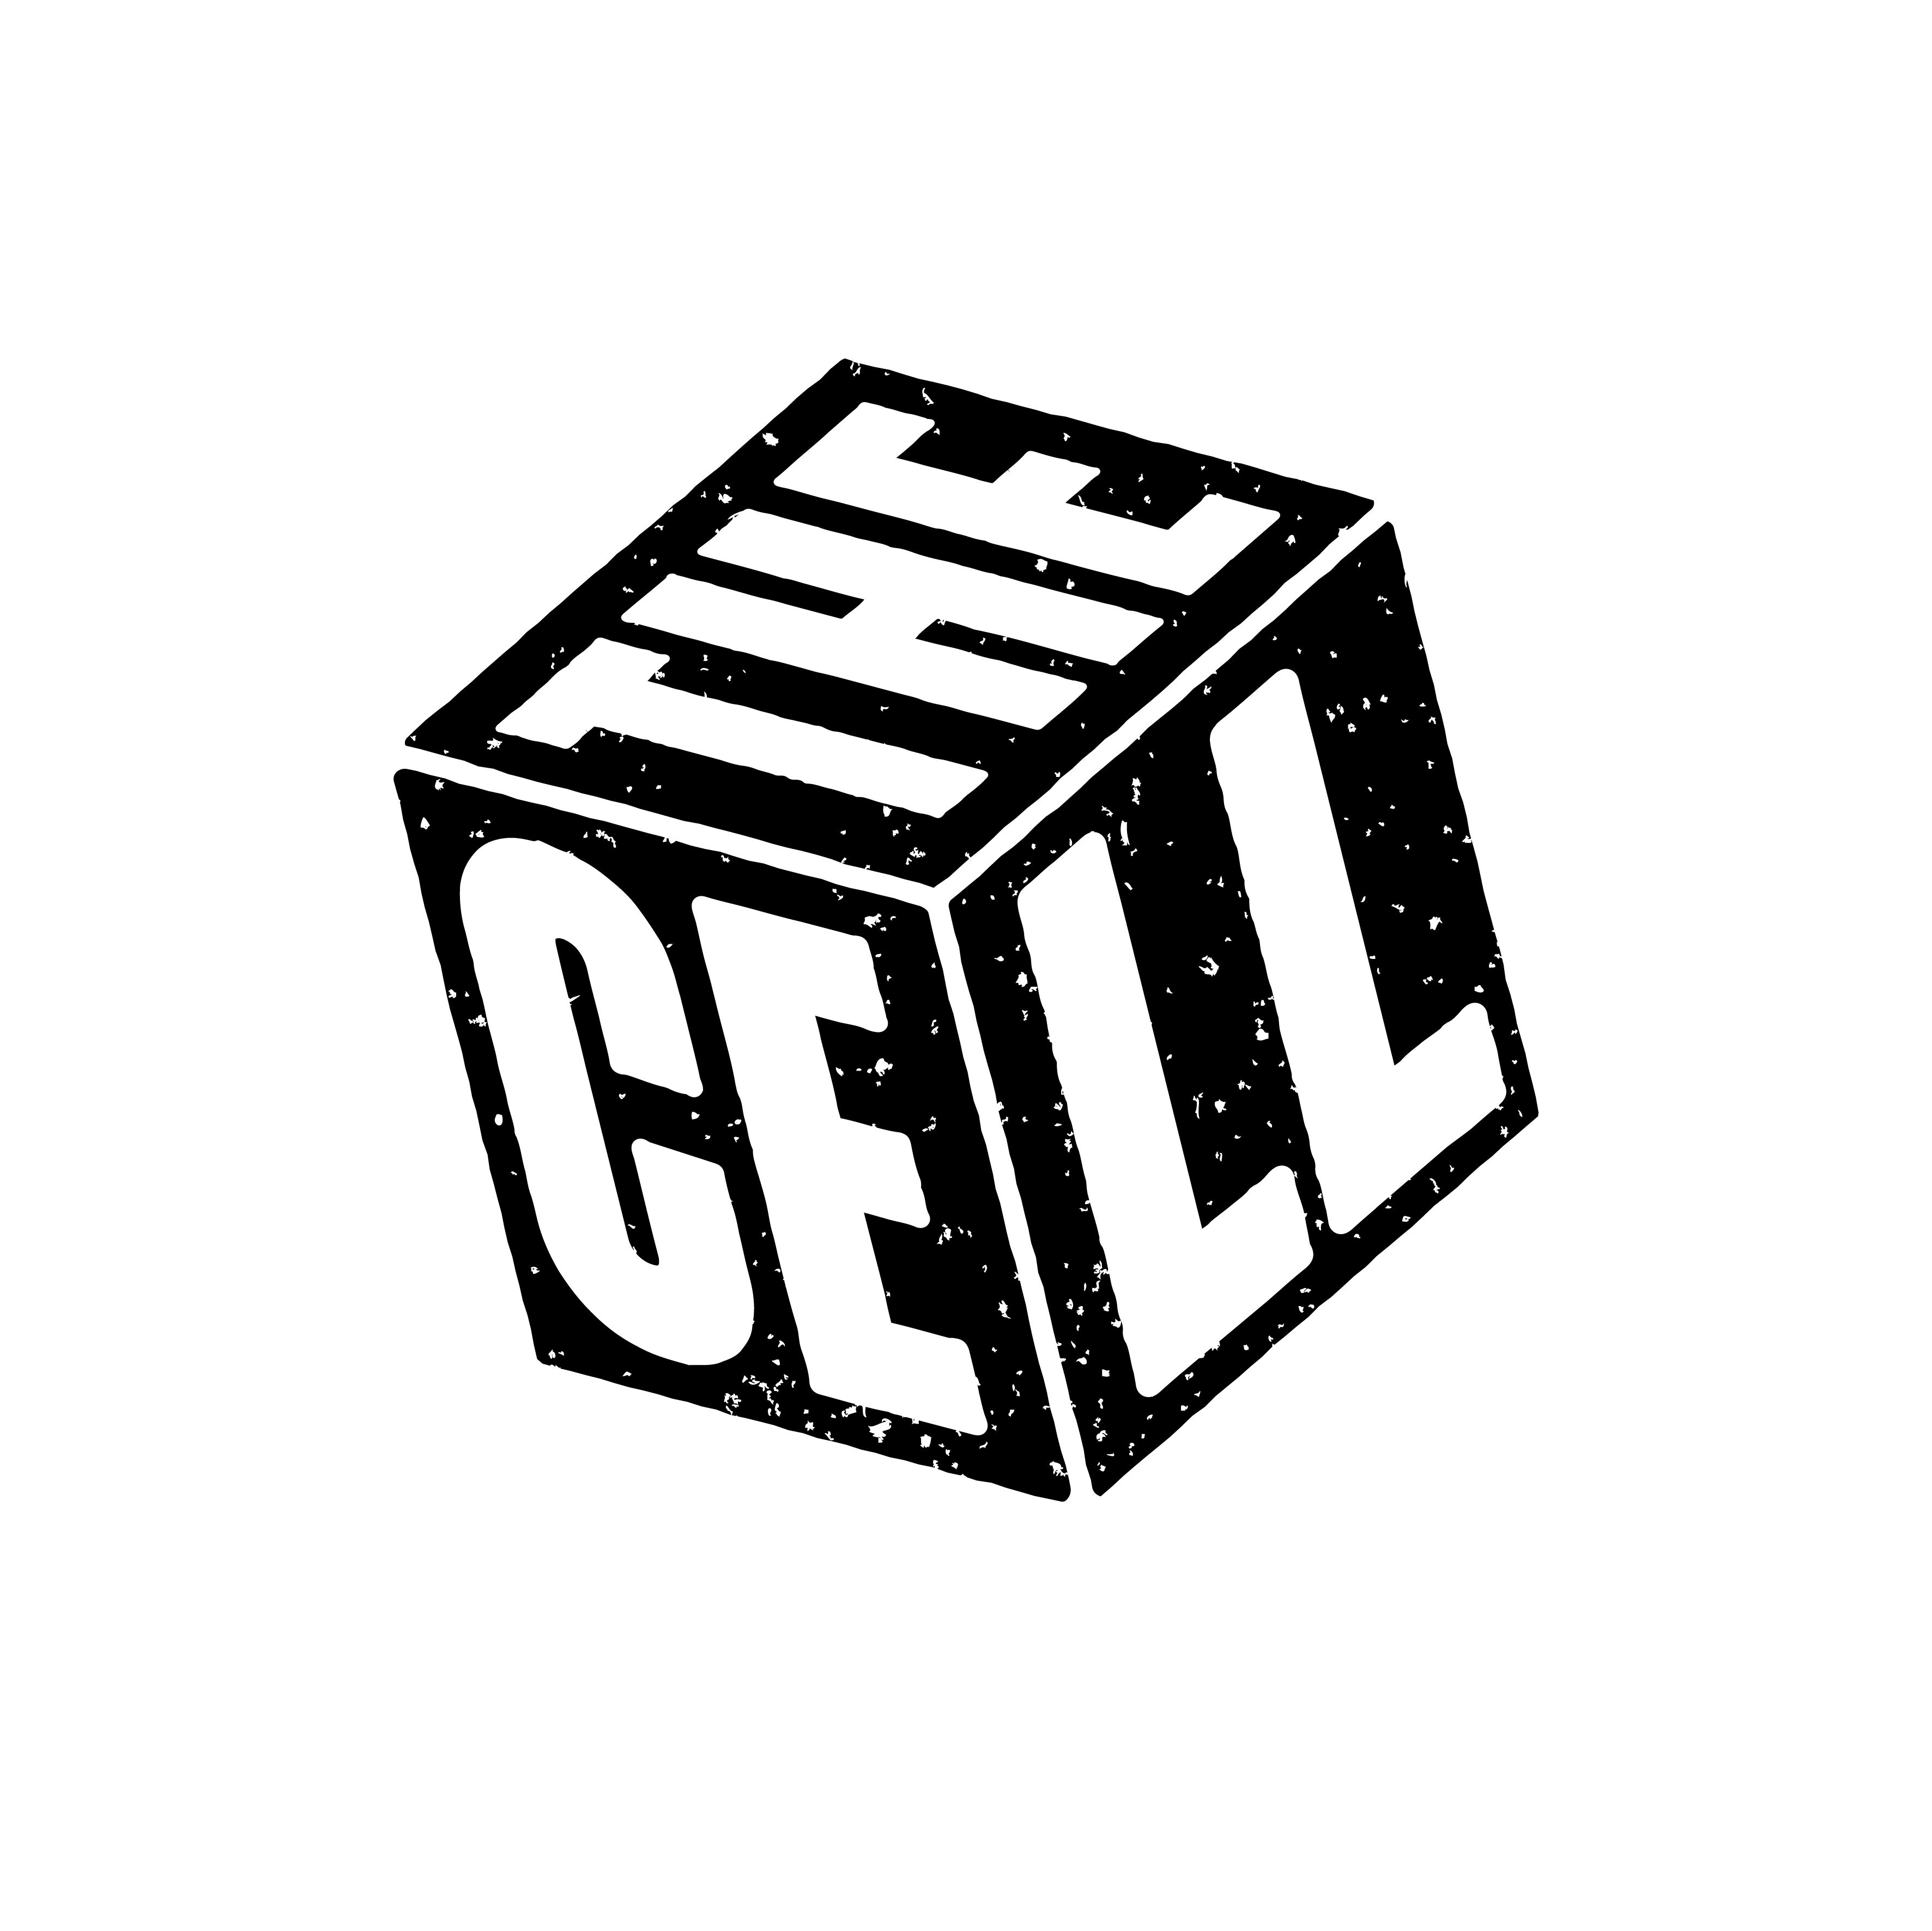 The CELL